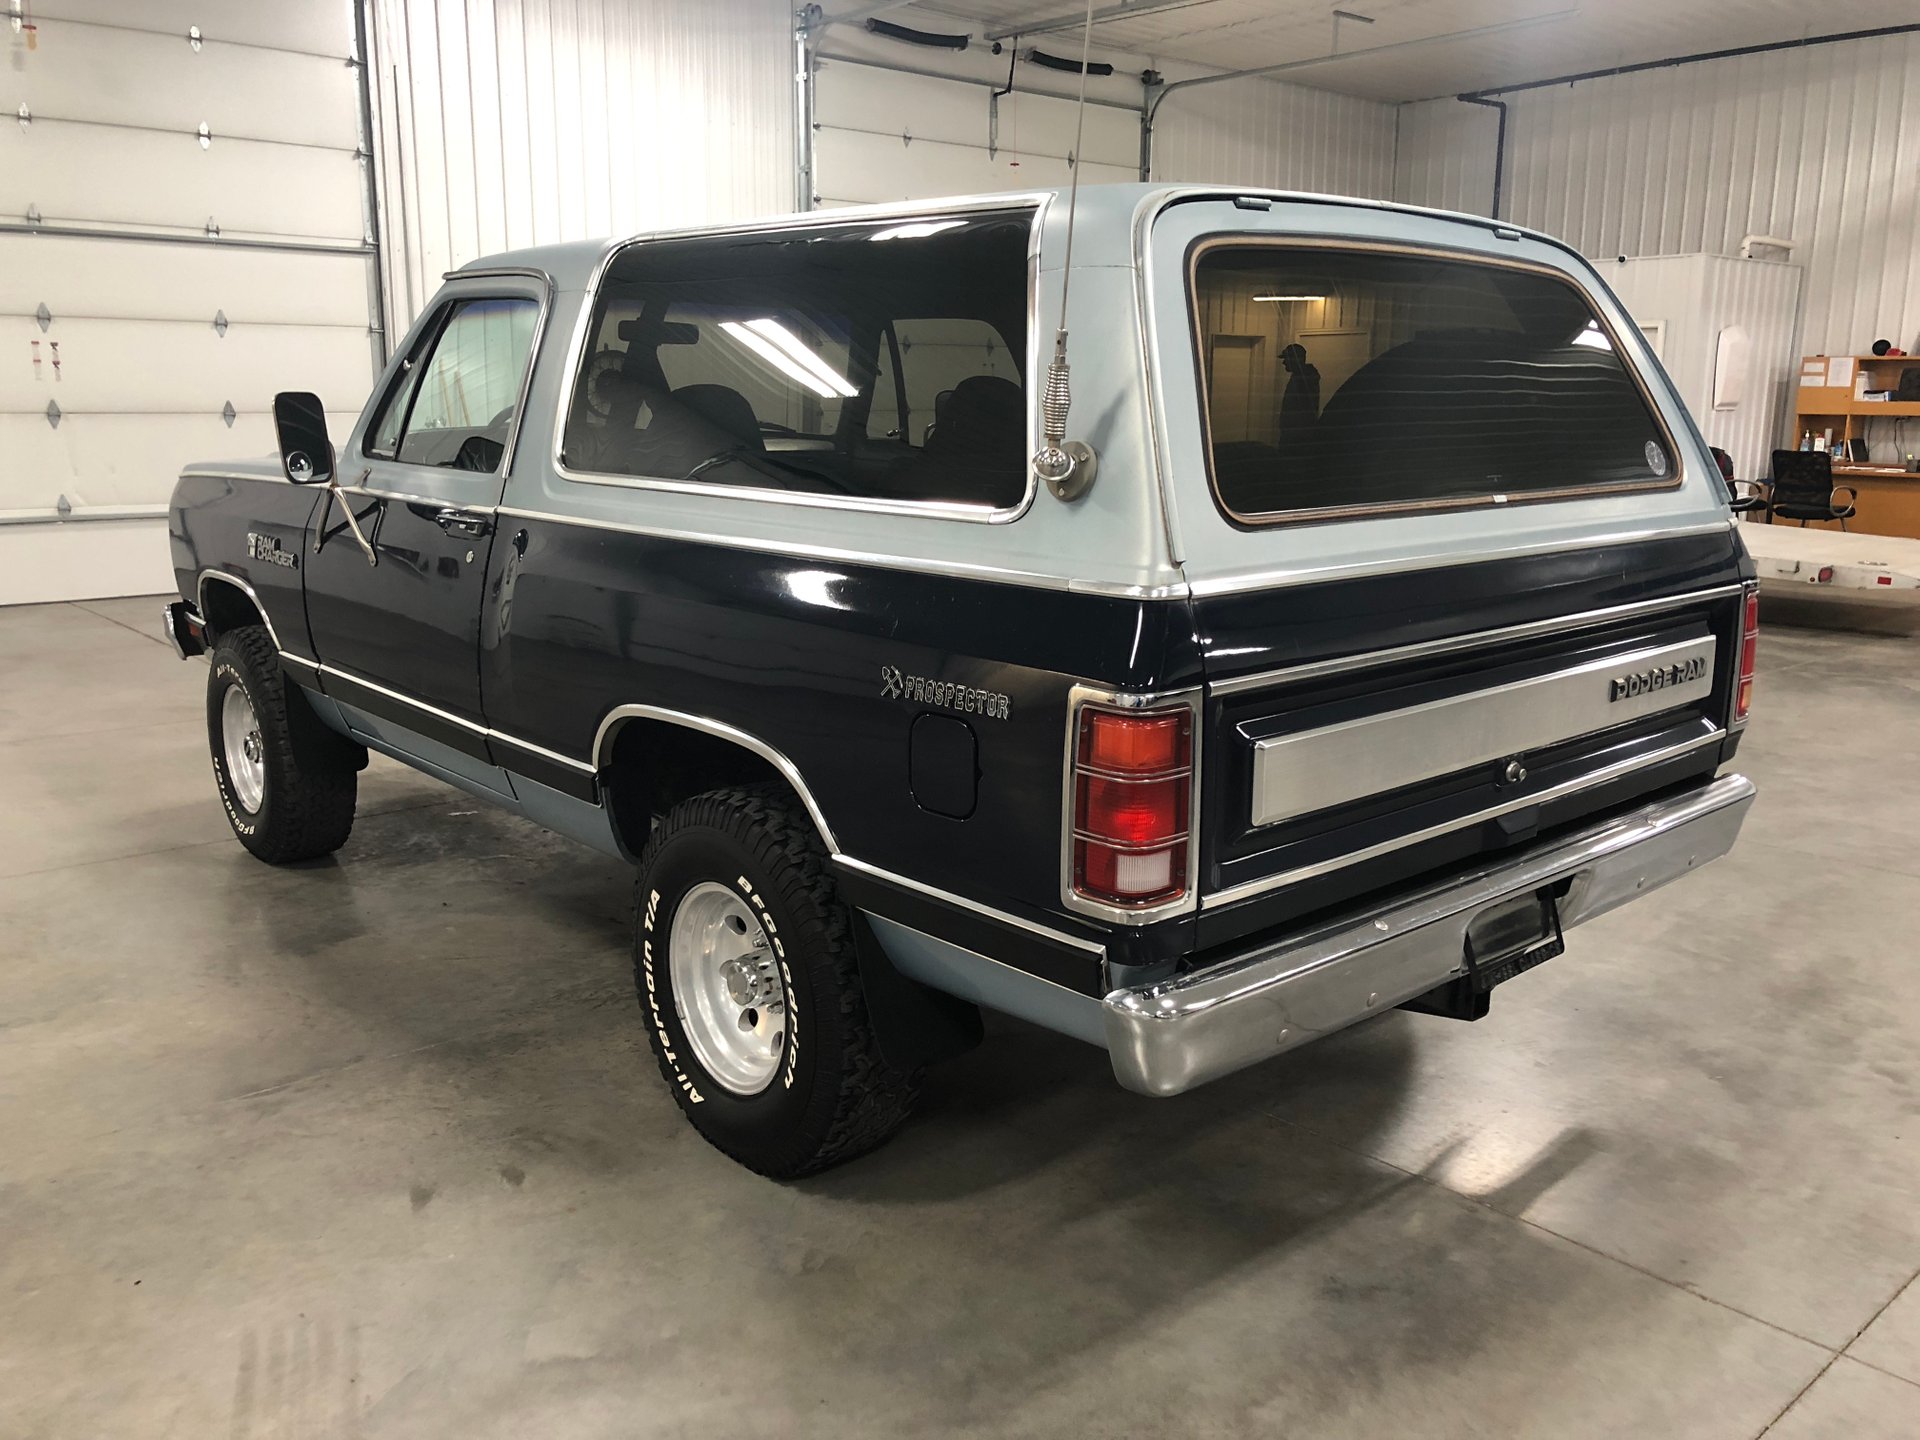 1983 Dodge Ramcharger | 4-Wheel Classics/Classic Car, Truck, and SUV Sales